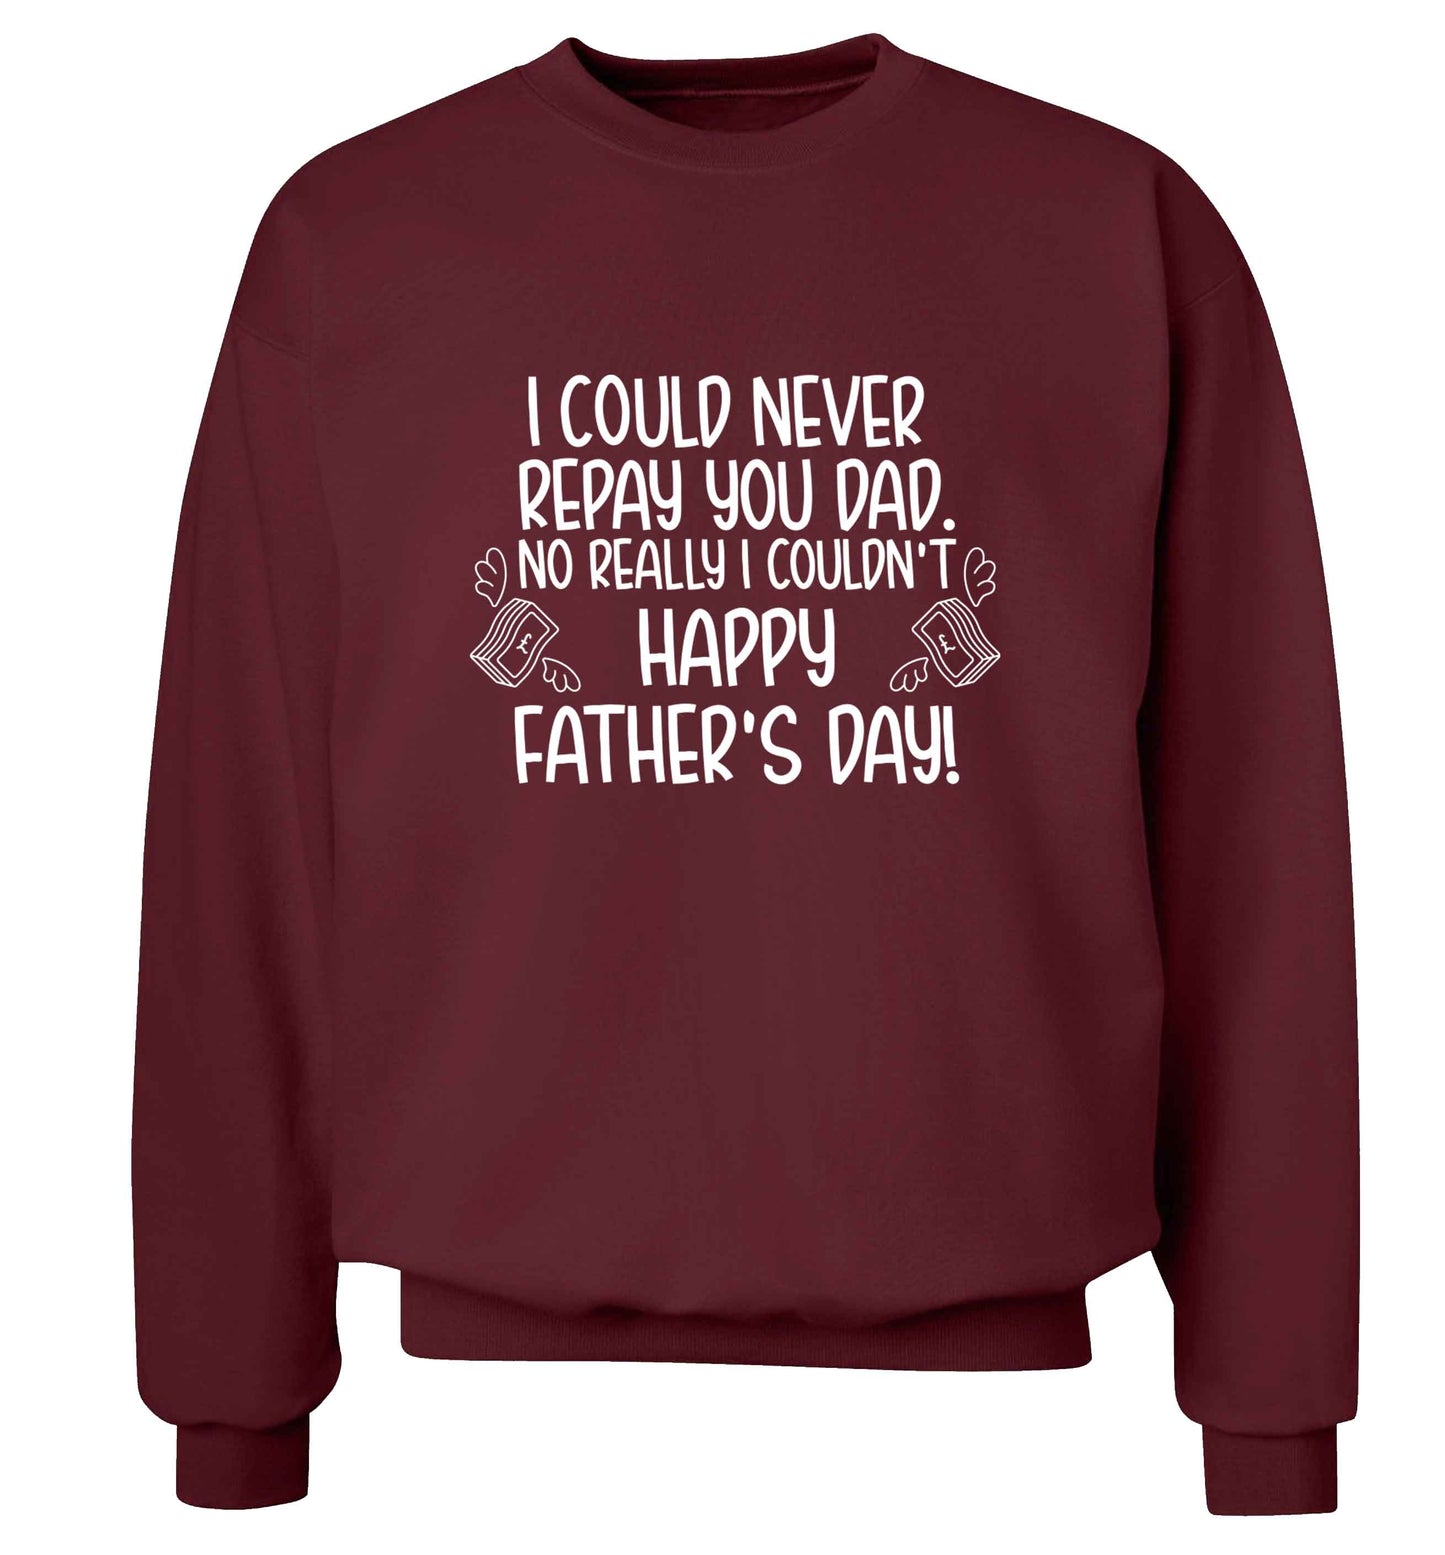 I could never repay you dad. No I really couldn't happy Father's day! adult's unisex maroon sweater 2XL